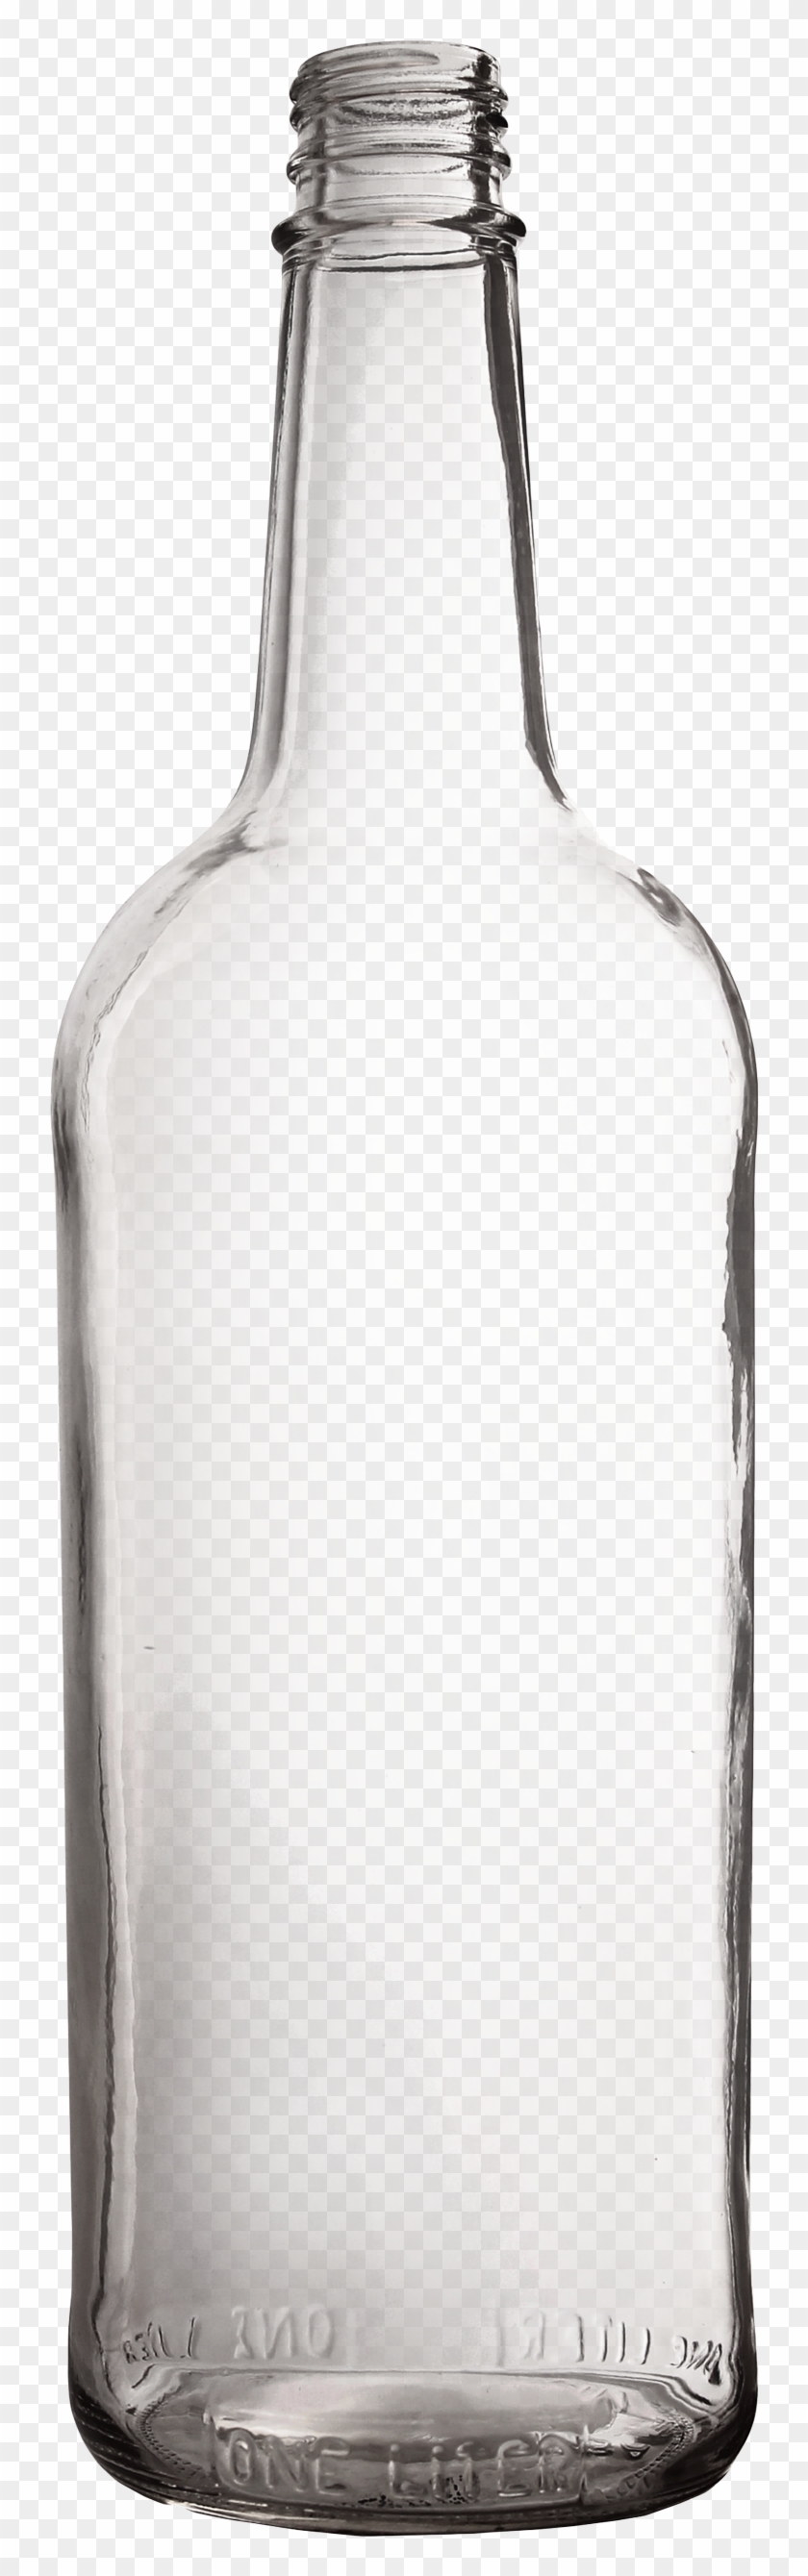 2200 X 2879 - Empty Whiskey Bottles Png Clipart